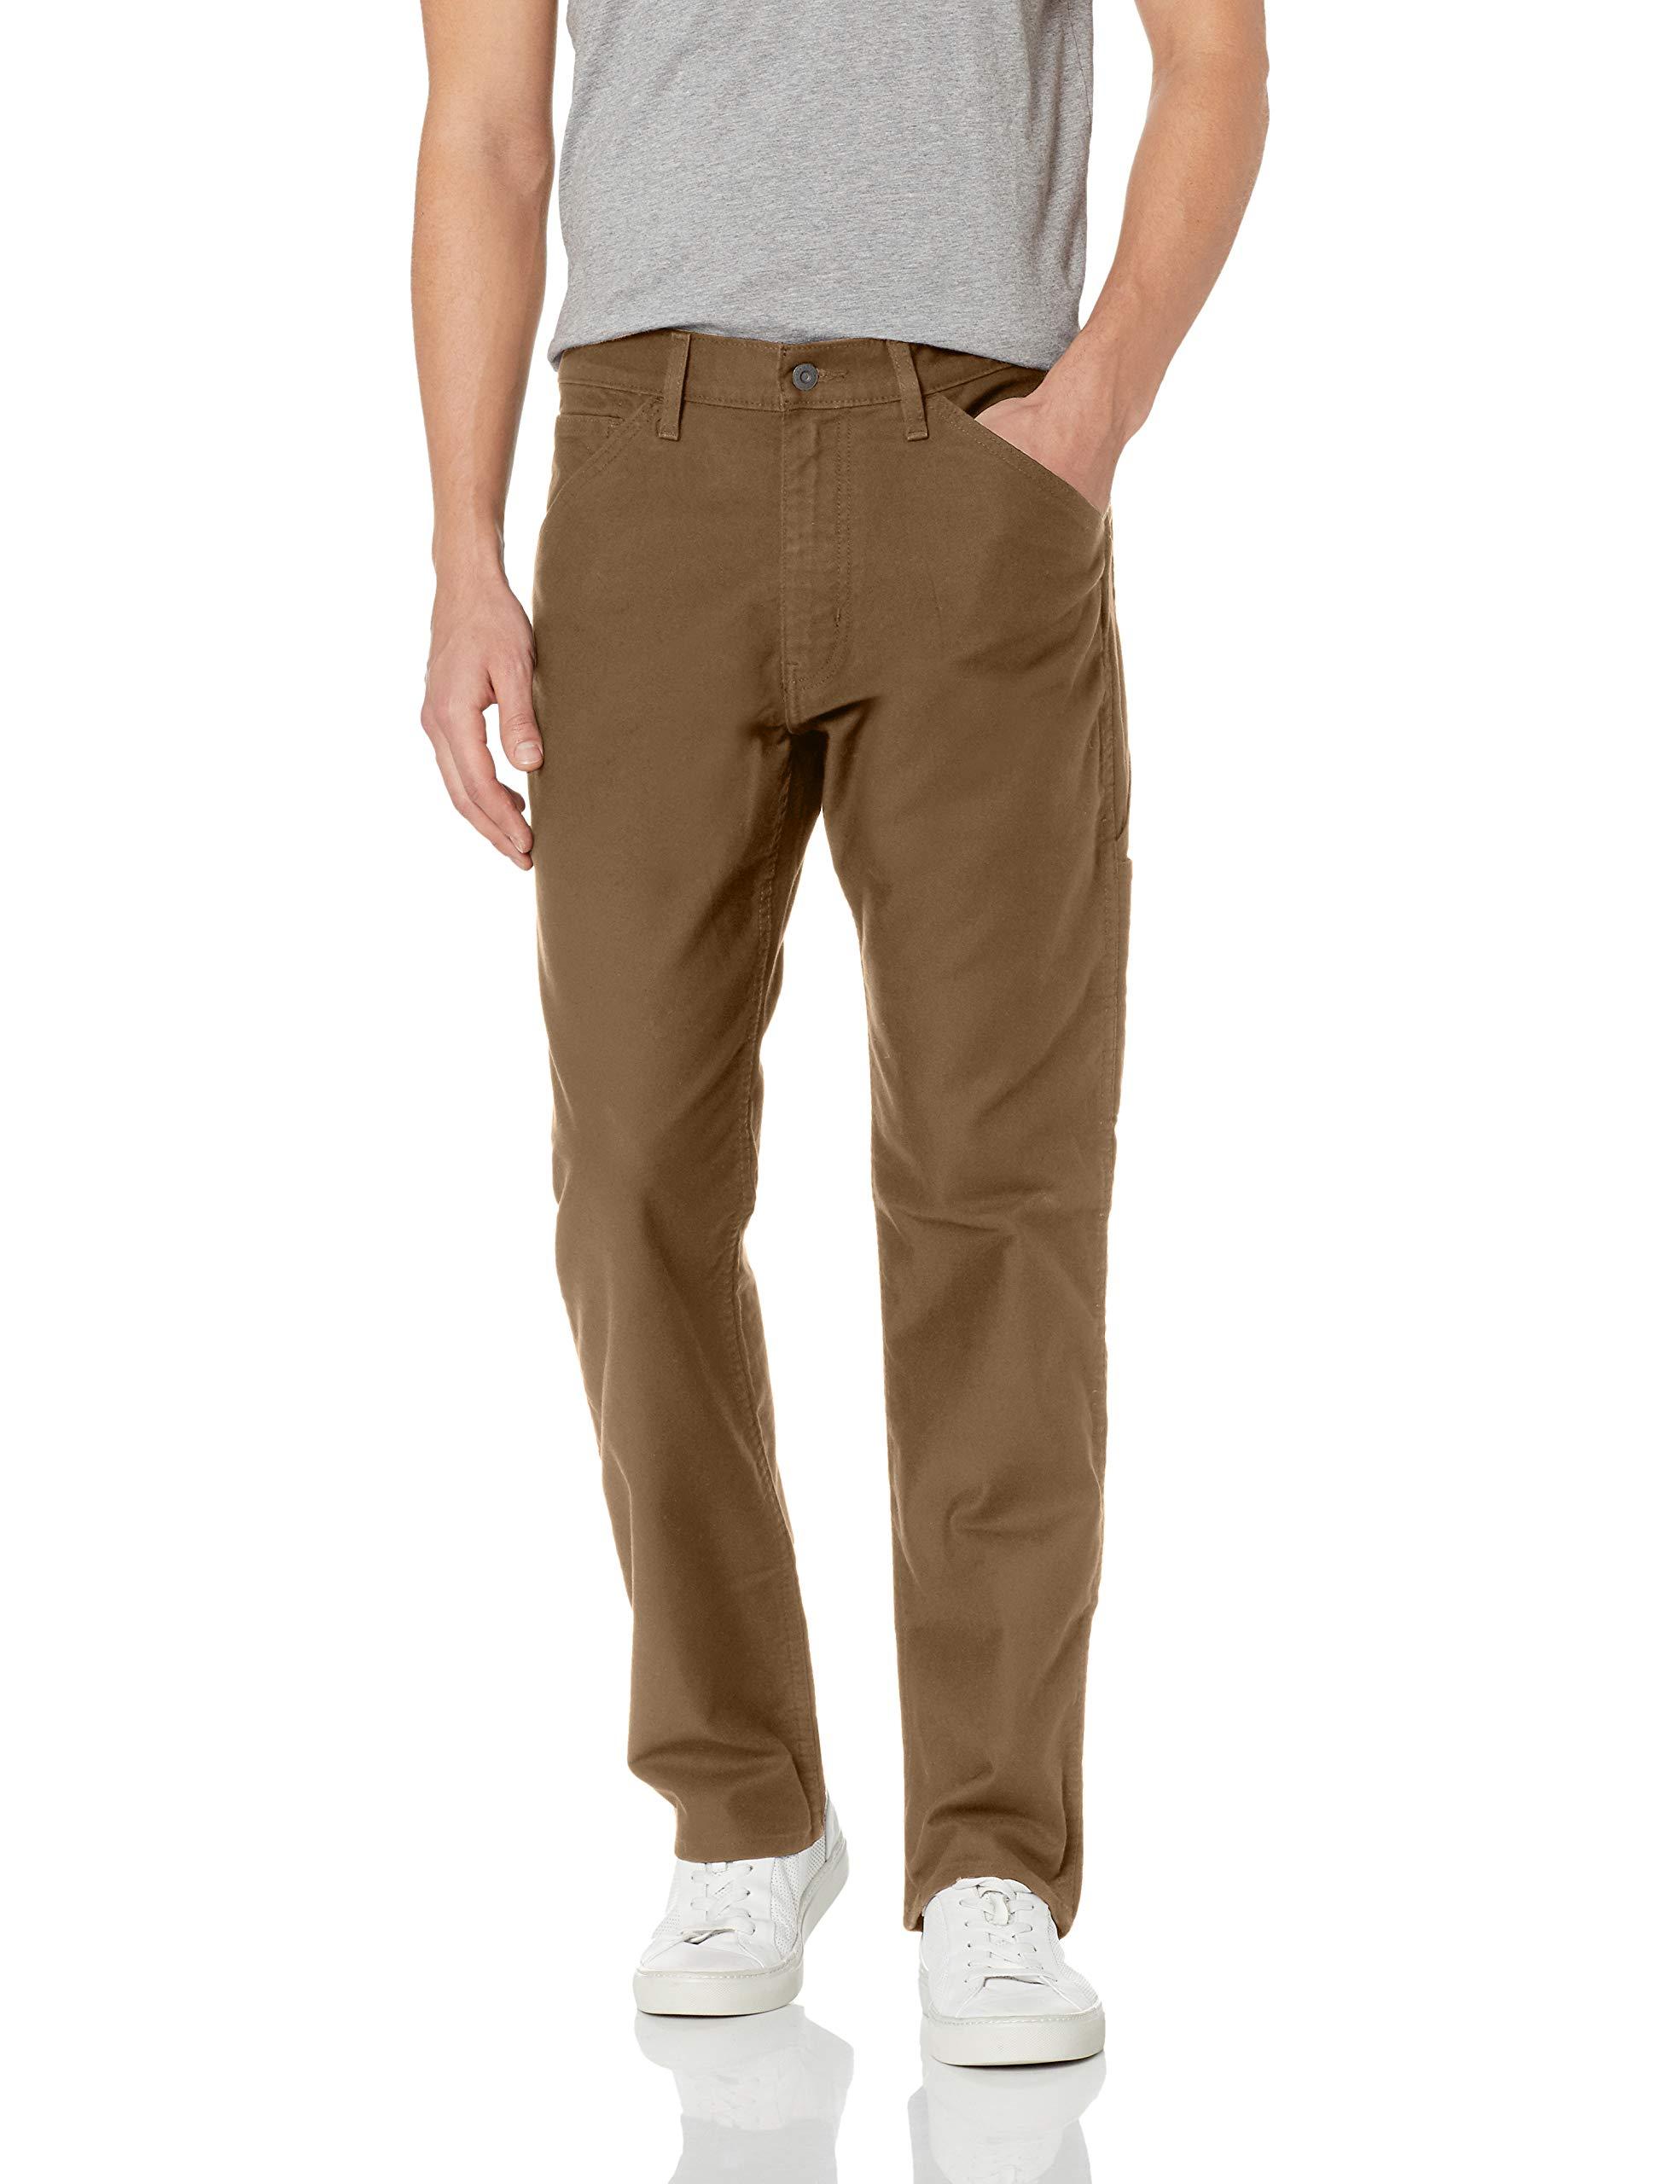 Levi's Workwear 545 Athletic Fit Utility-pant in Brown for Men - Lyst